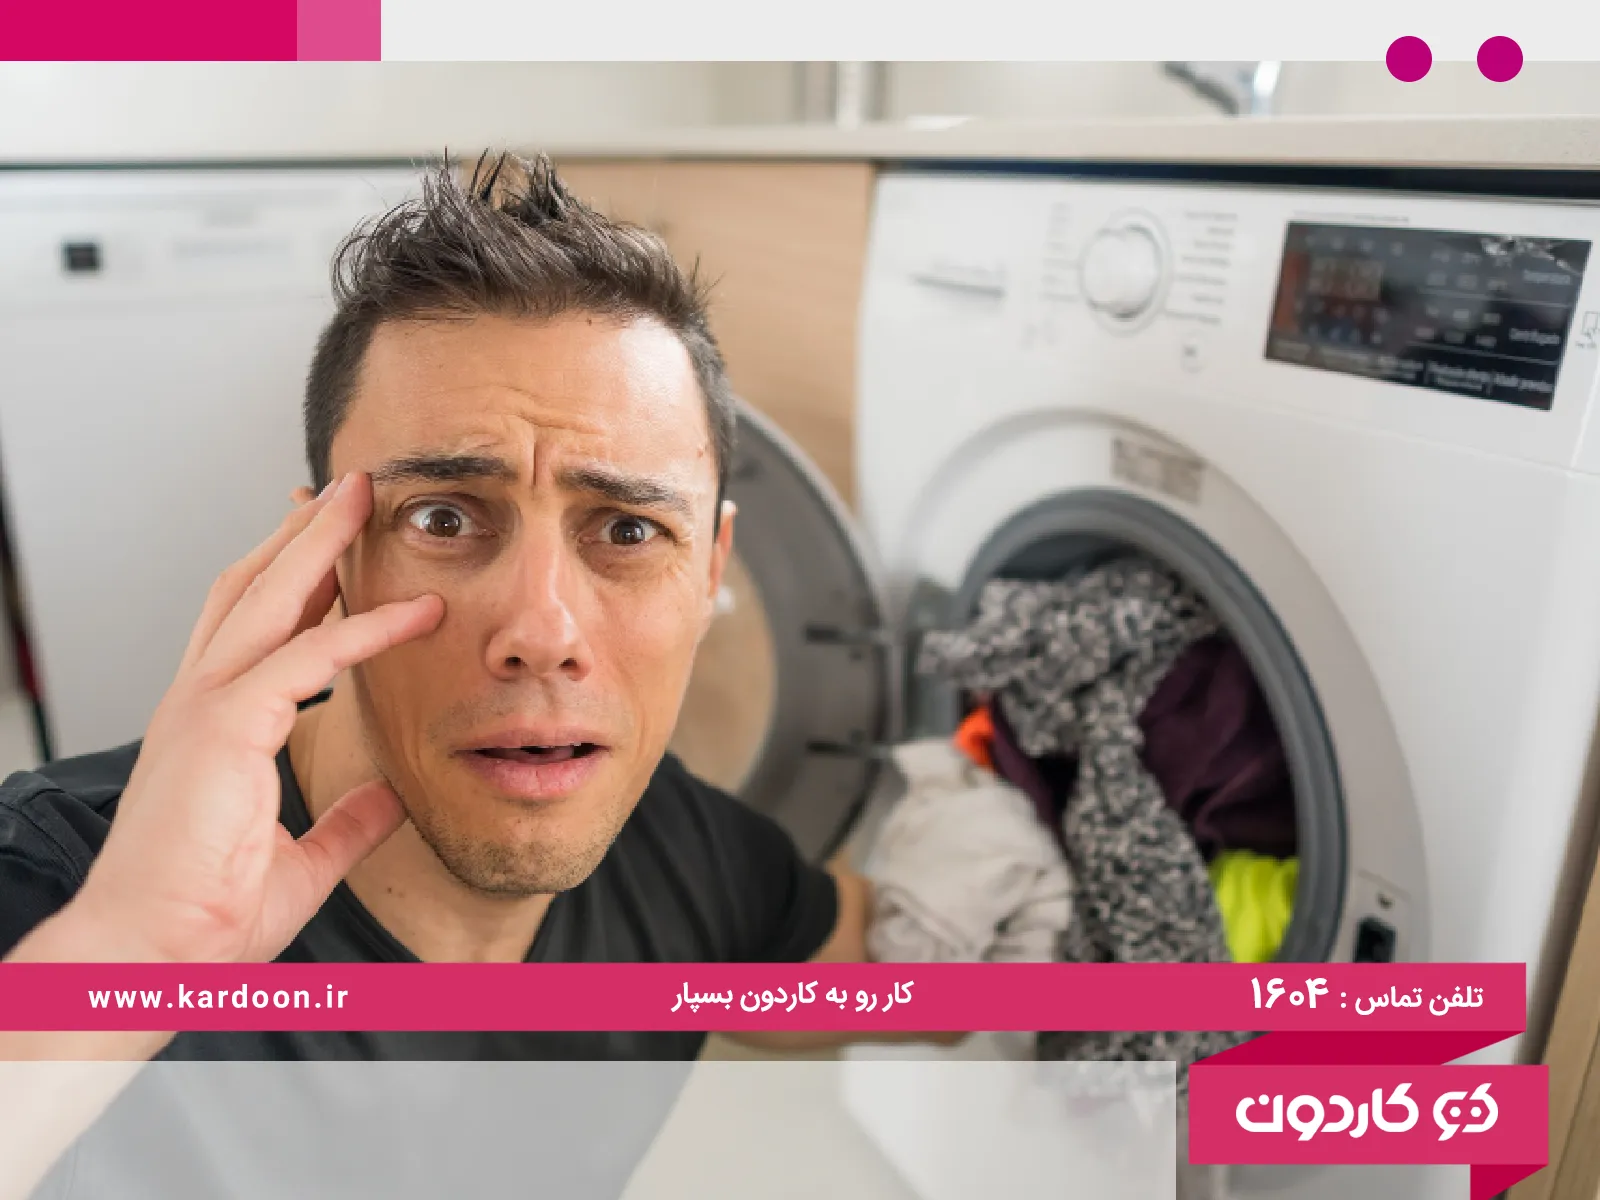 Common mistakes in using laundry